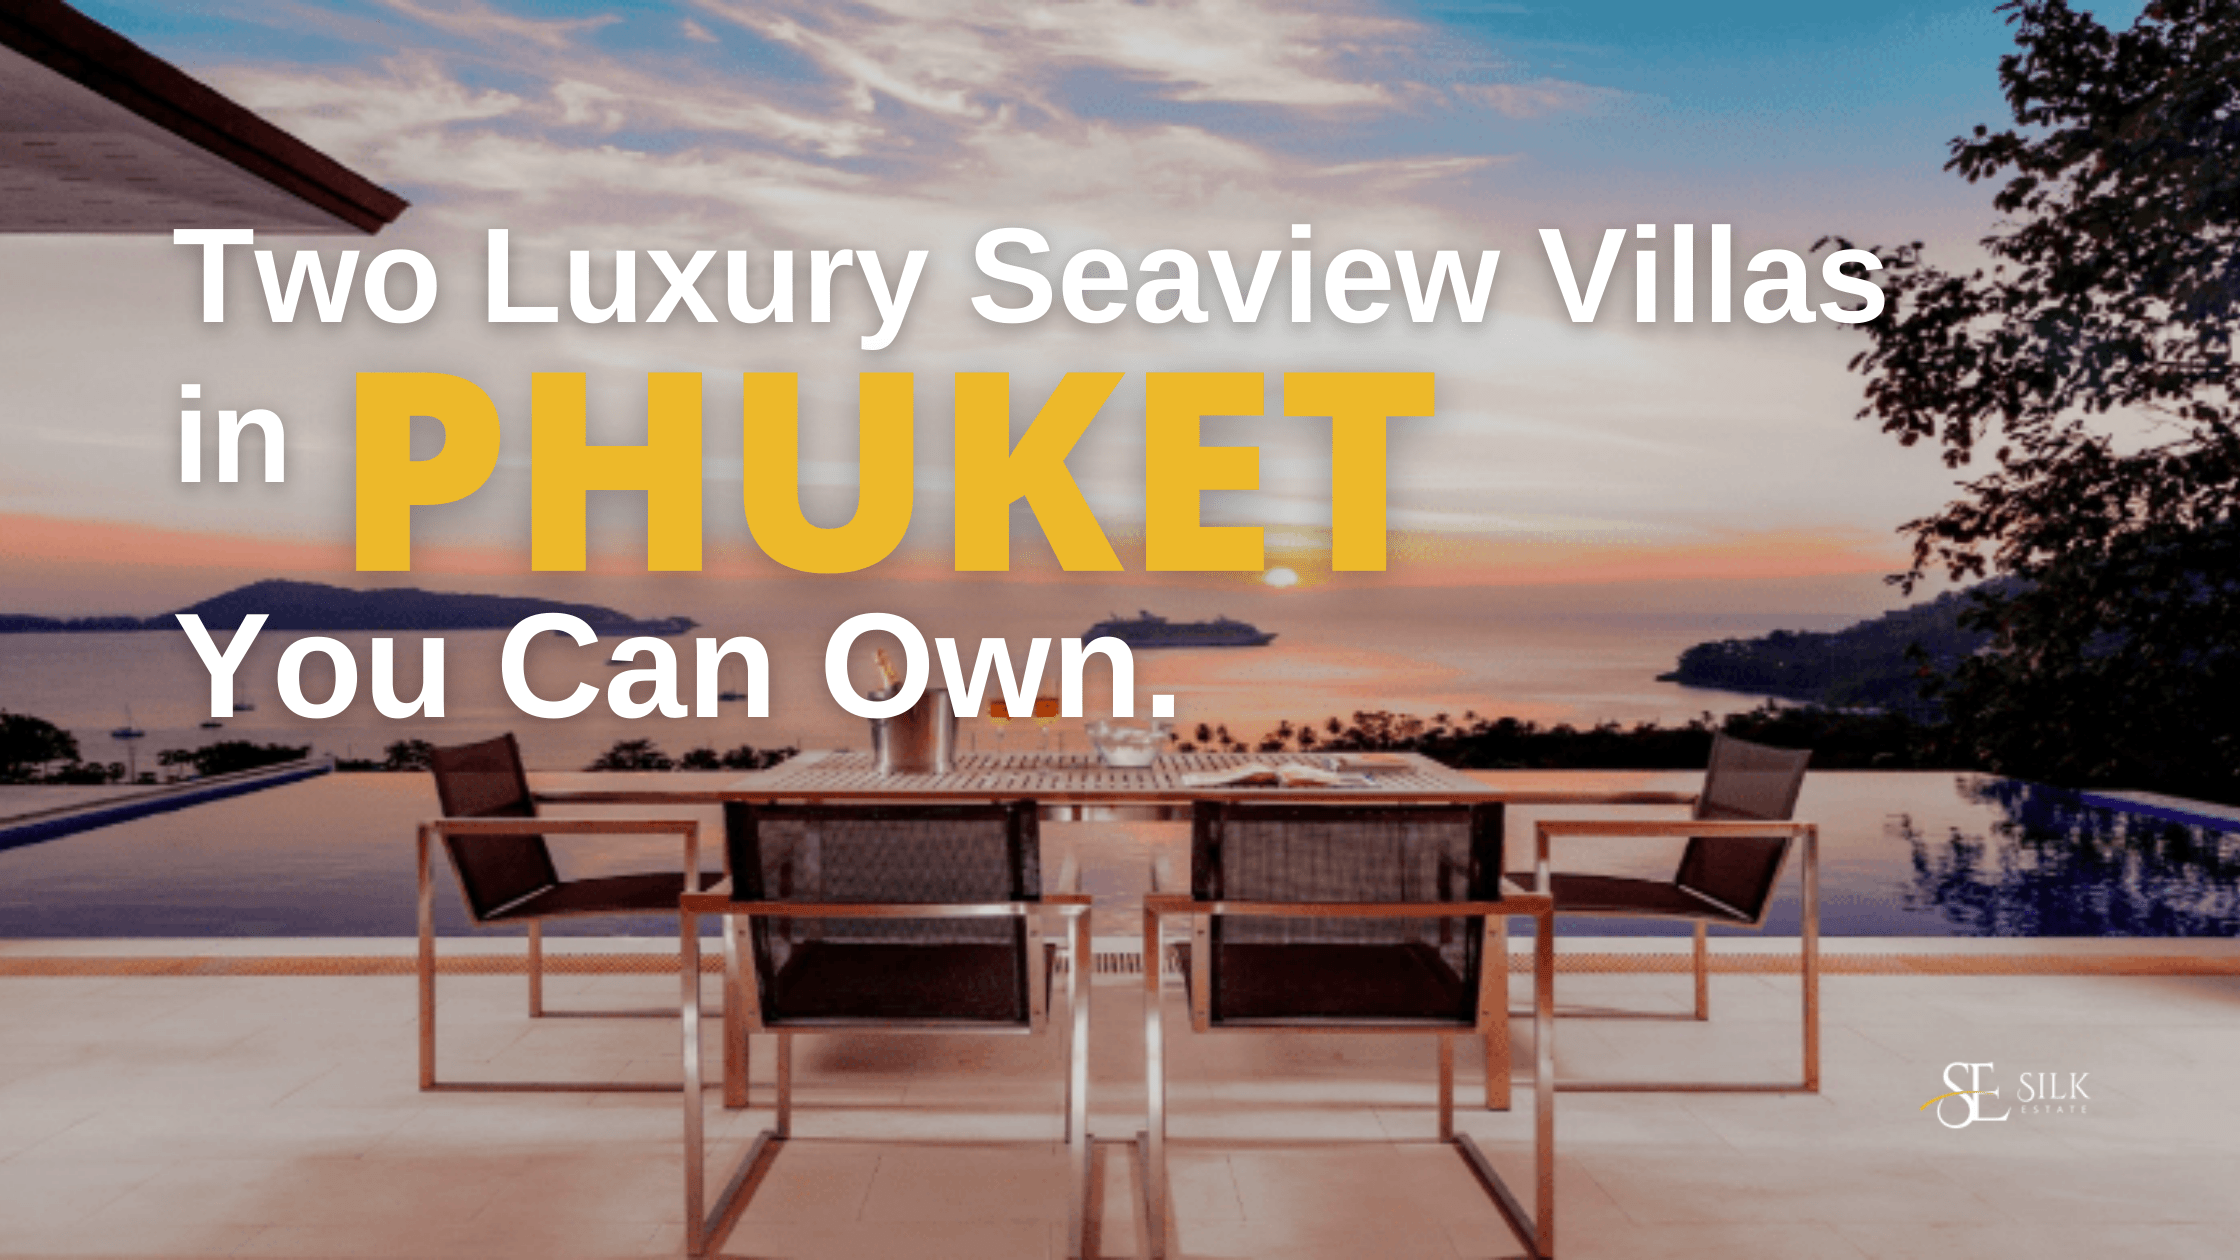 Luxury-seaview-villa-in-phukete-you-can-own-min